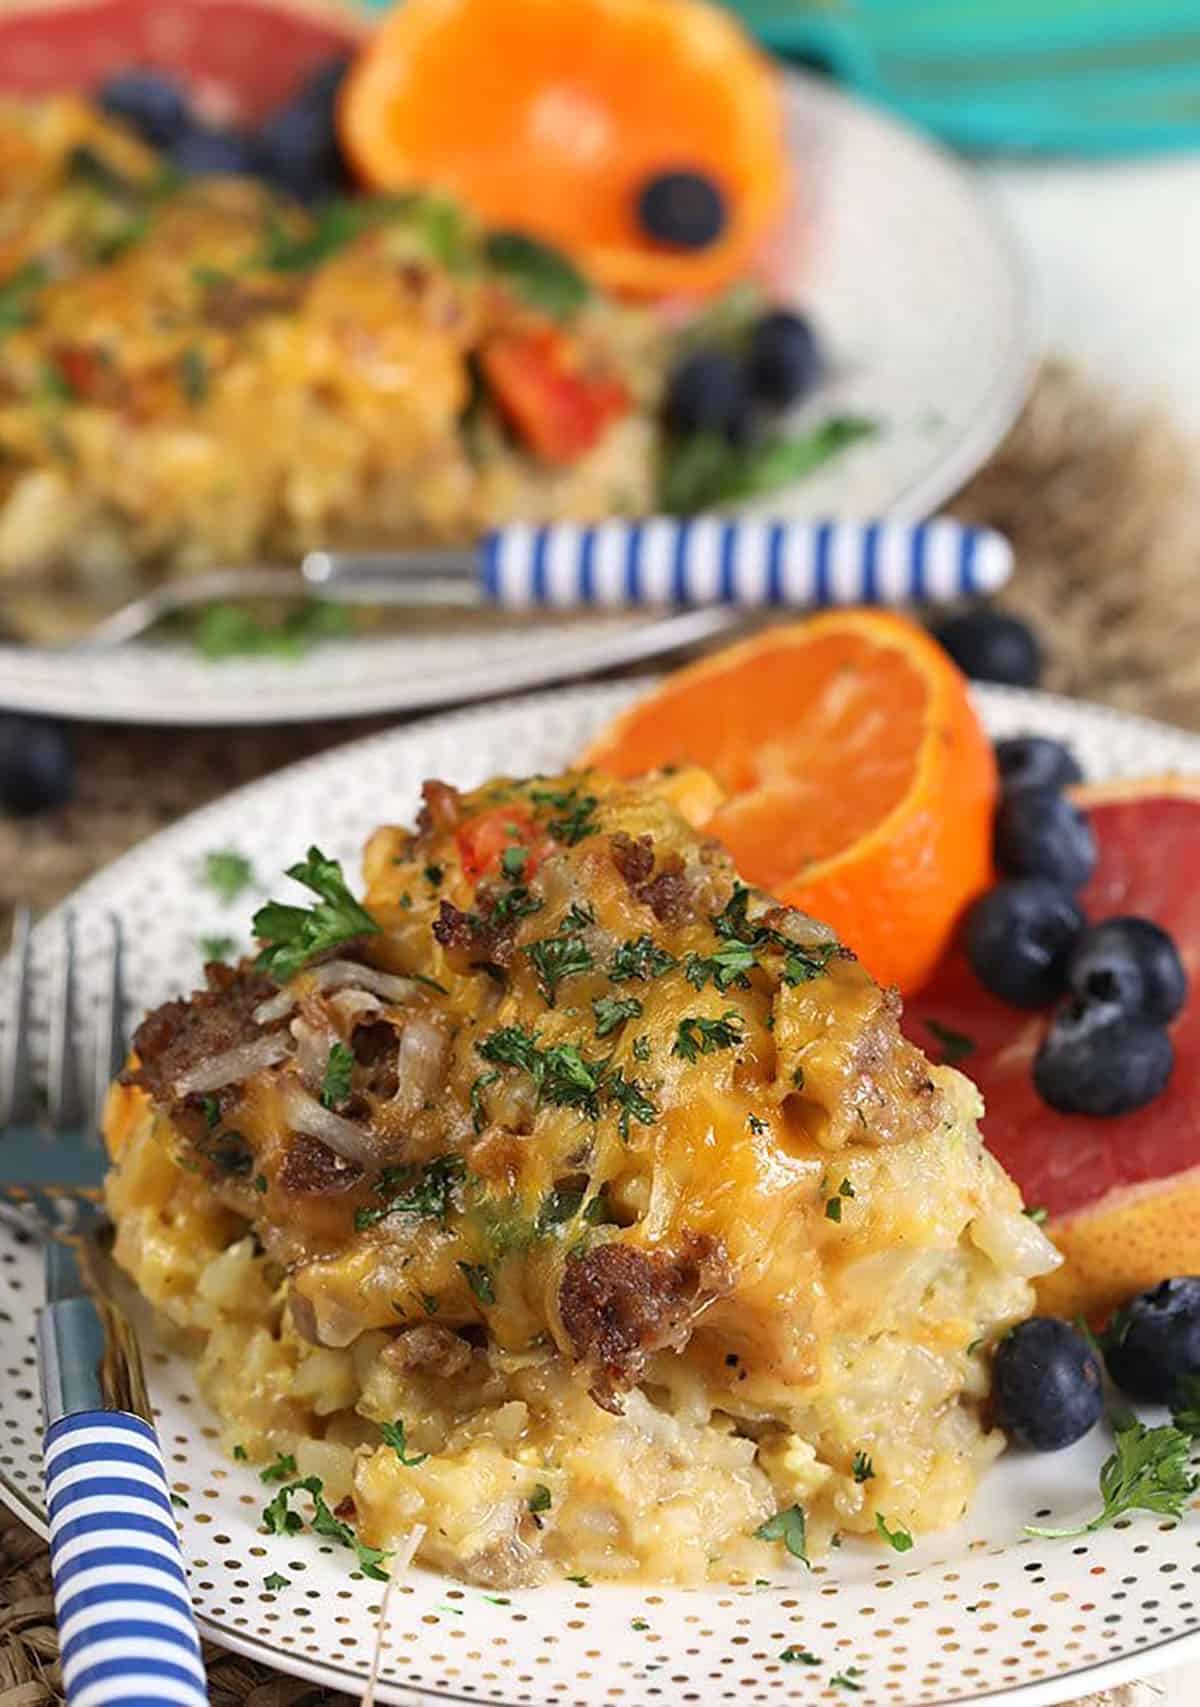 Tater tot breakfast casserole on a white plate with fruit.